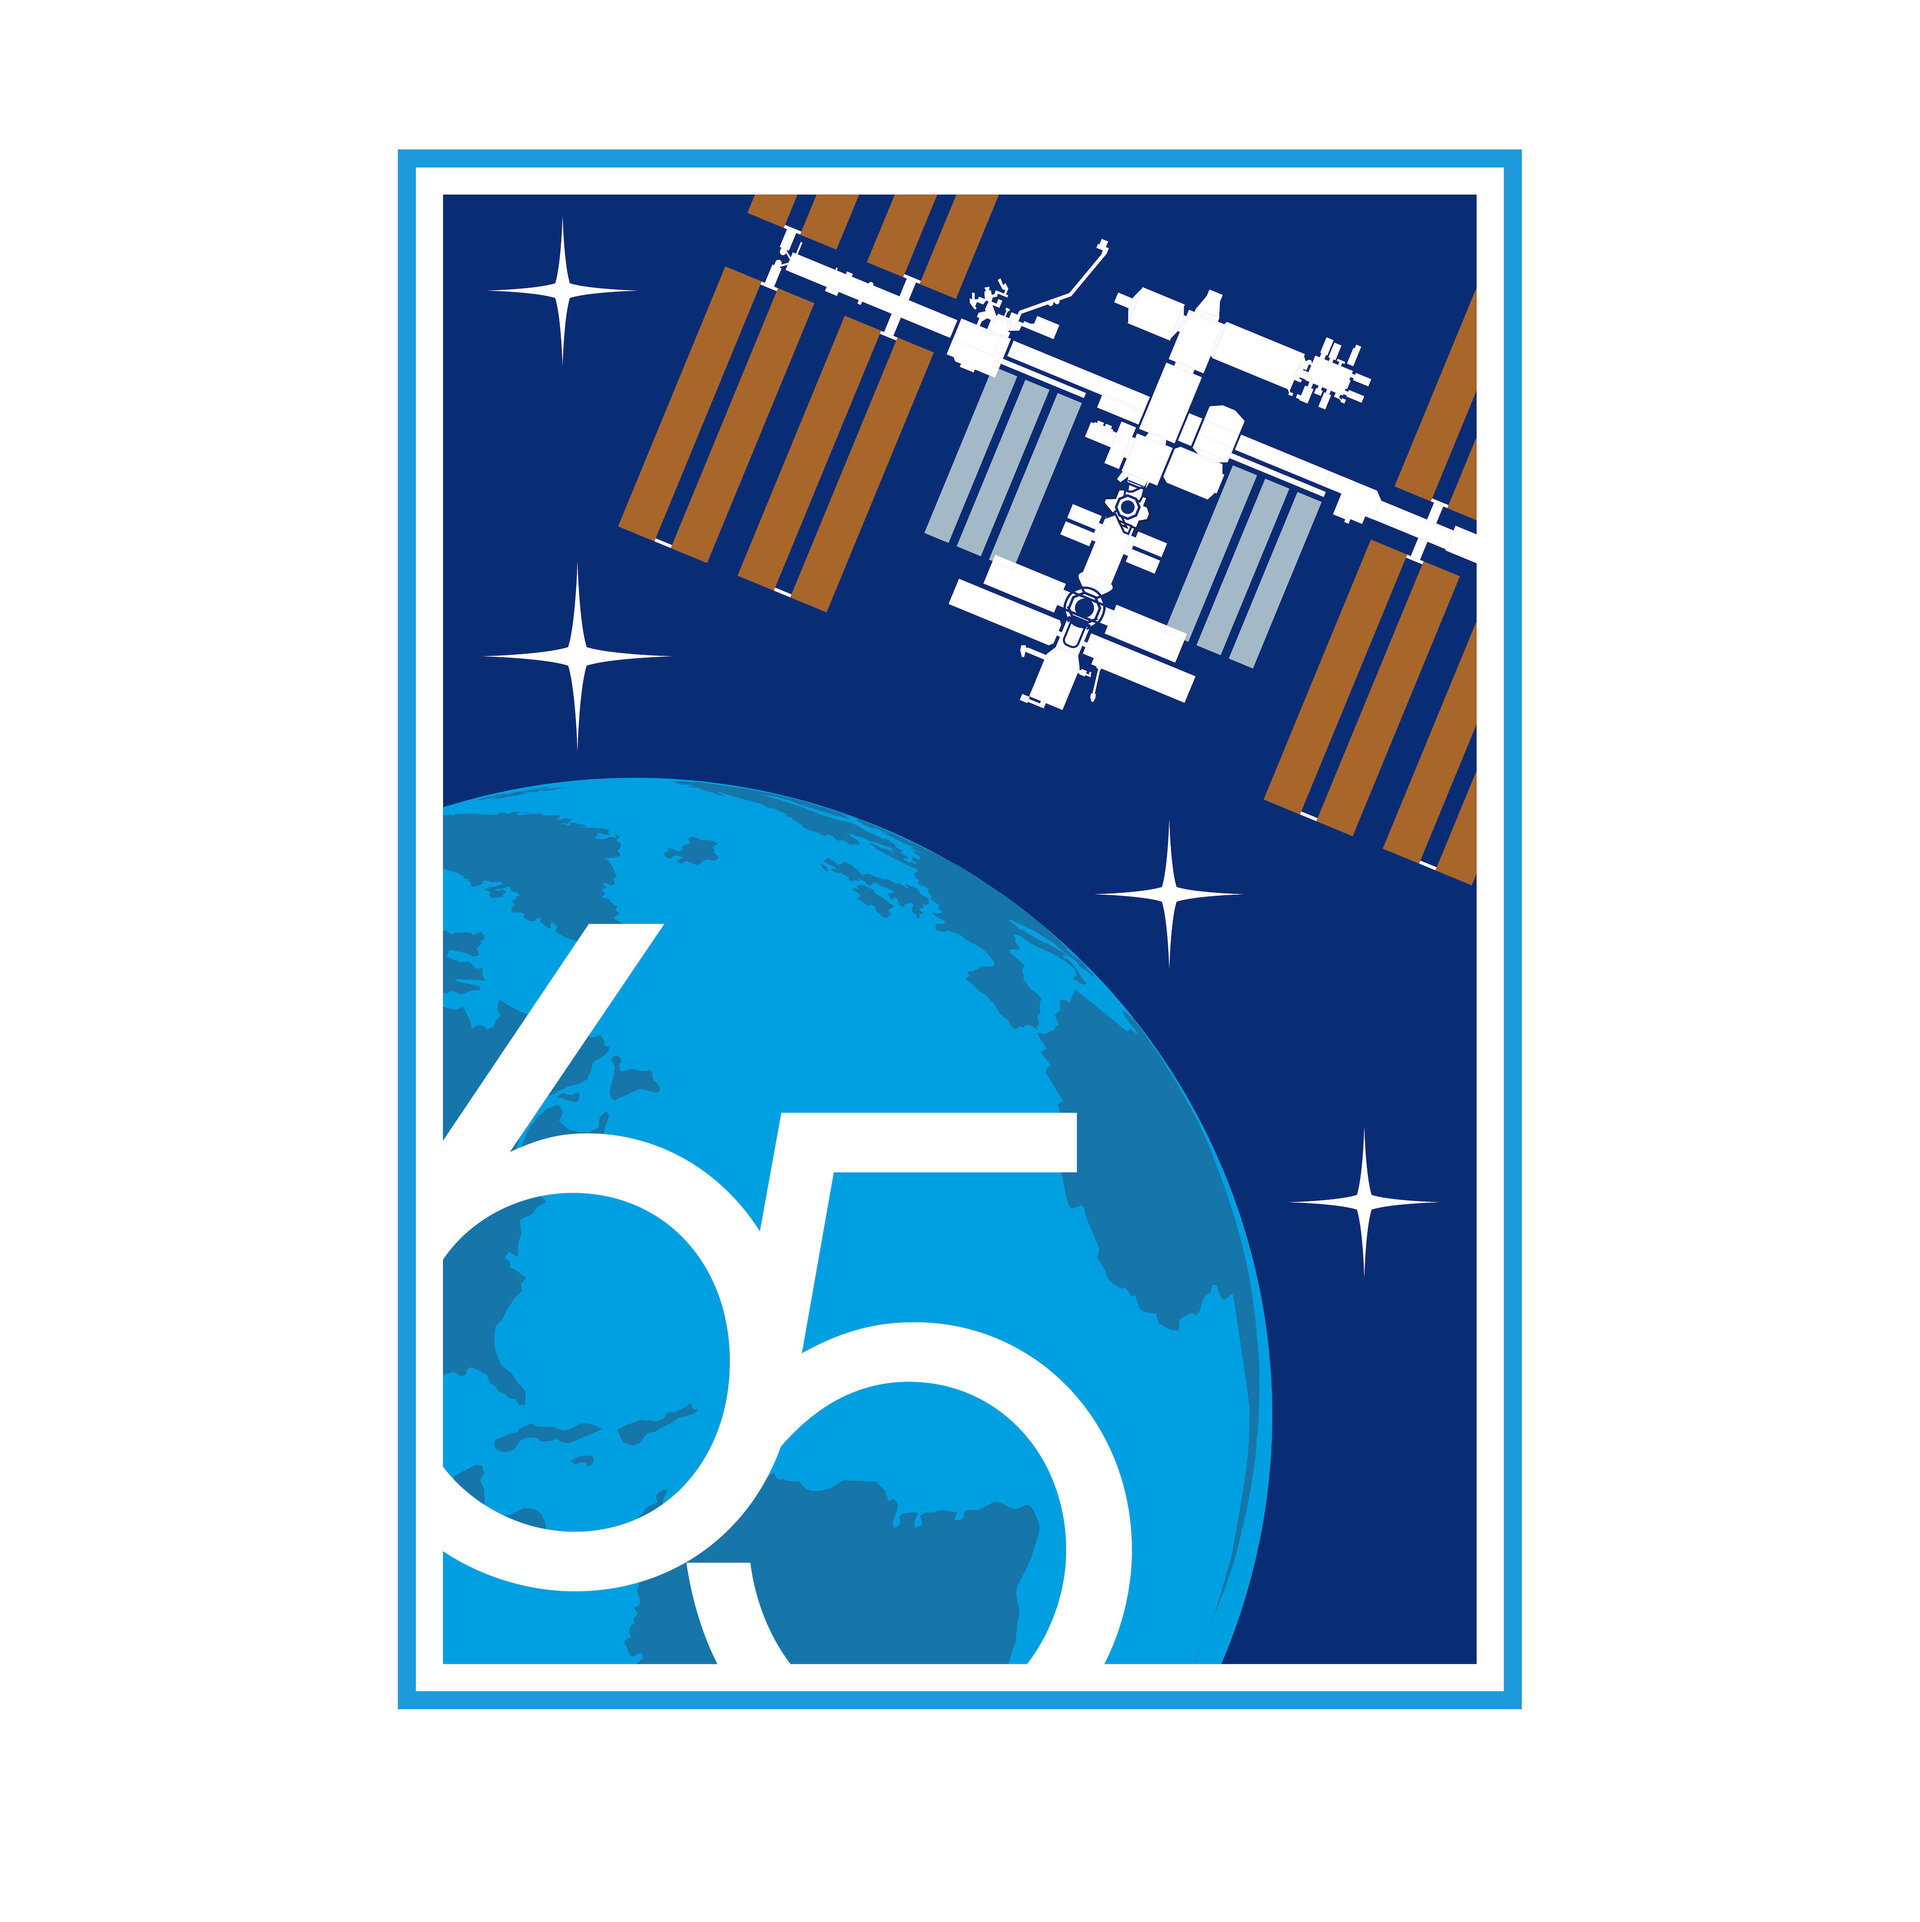 ISS Expedition 65 patch, 2021